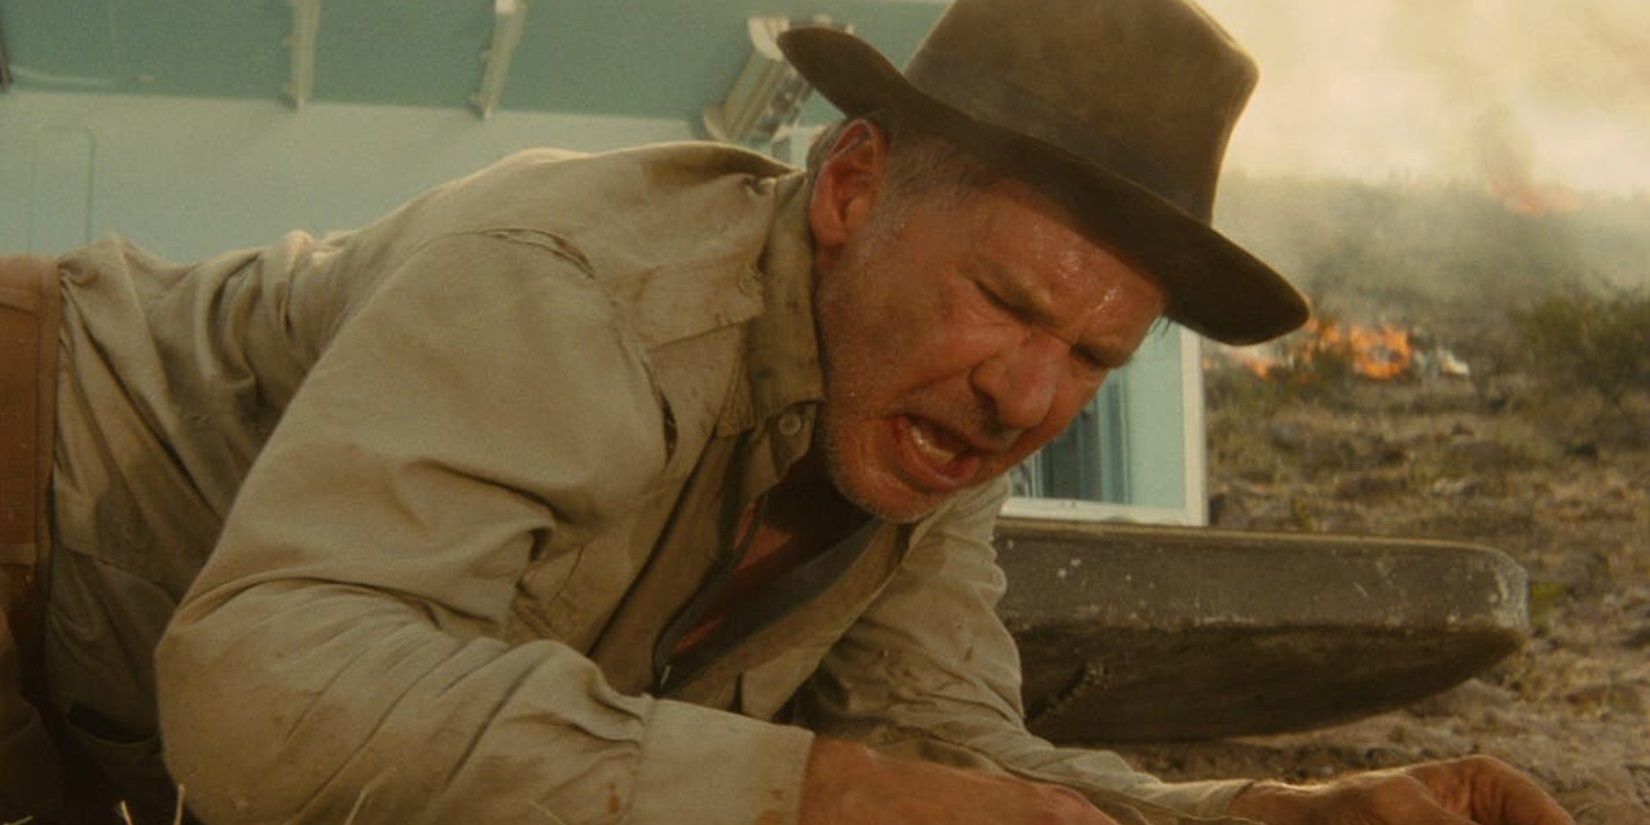 Indy tumbles out of a fridge in Indiana Jones and the Kingdom of the Crystal Skull